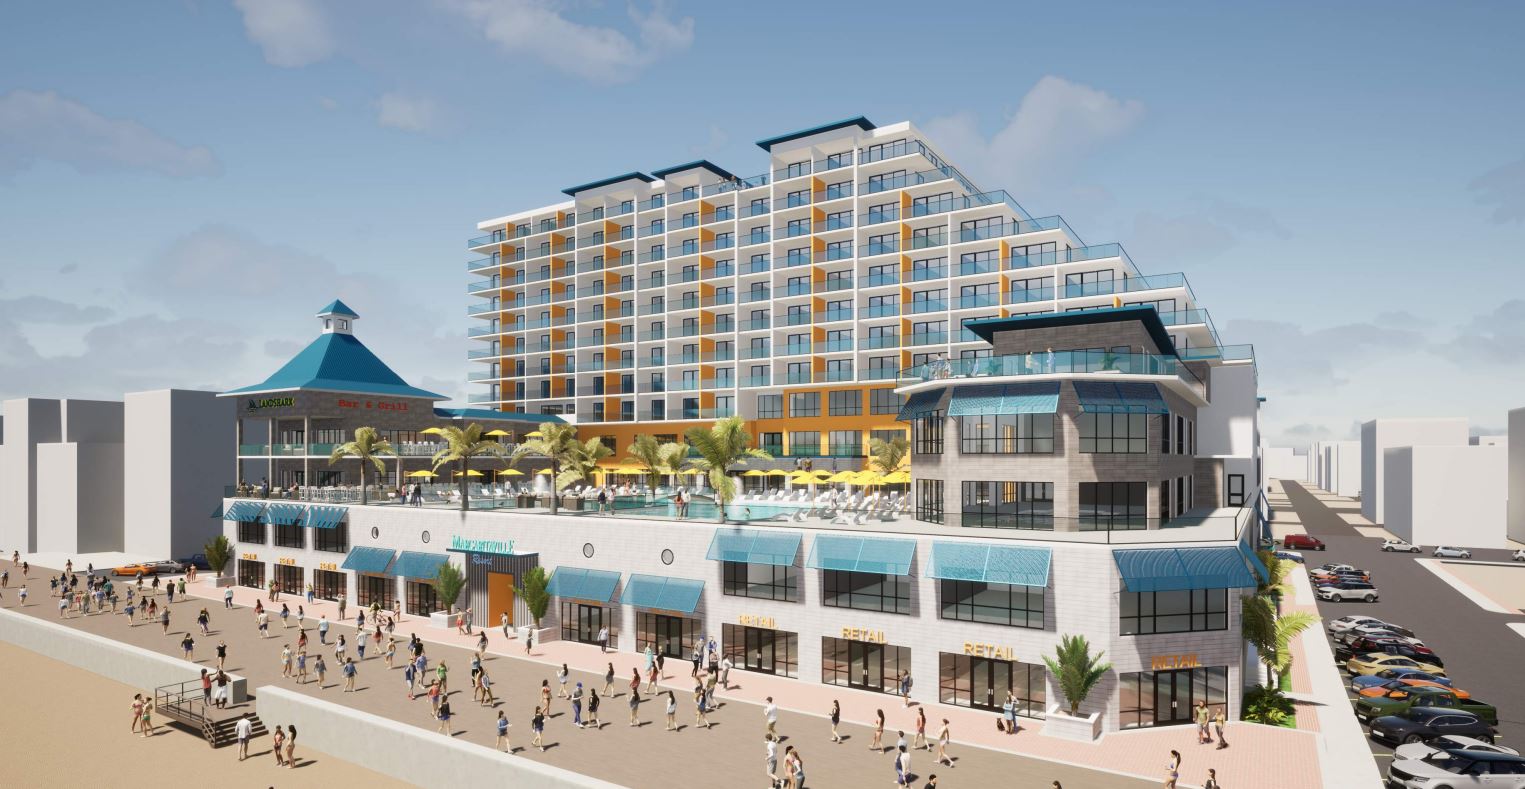 Although no official recommendation at this time, the majority of the OC Planning Commission supports Margaritaville